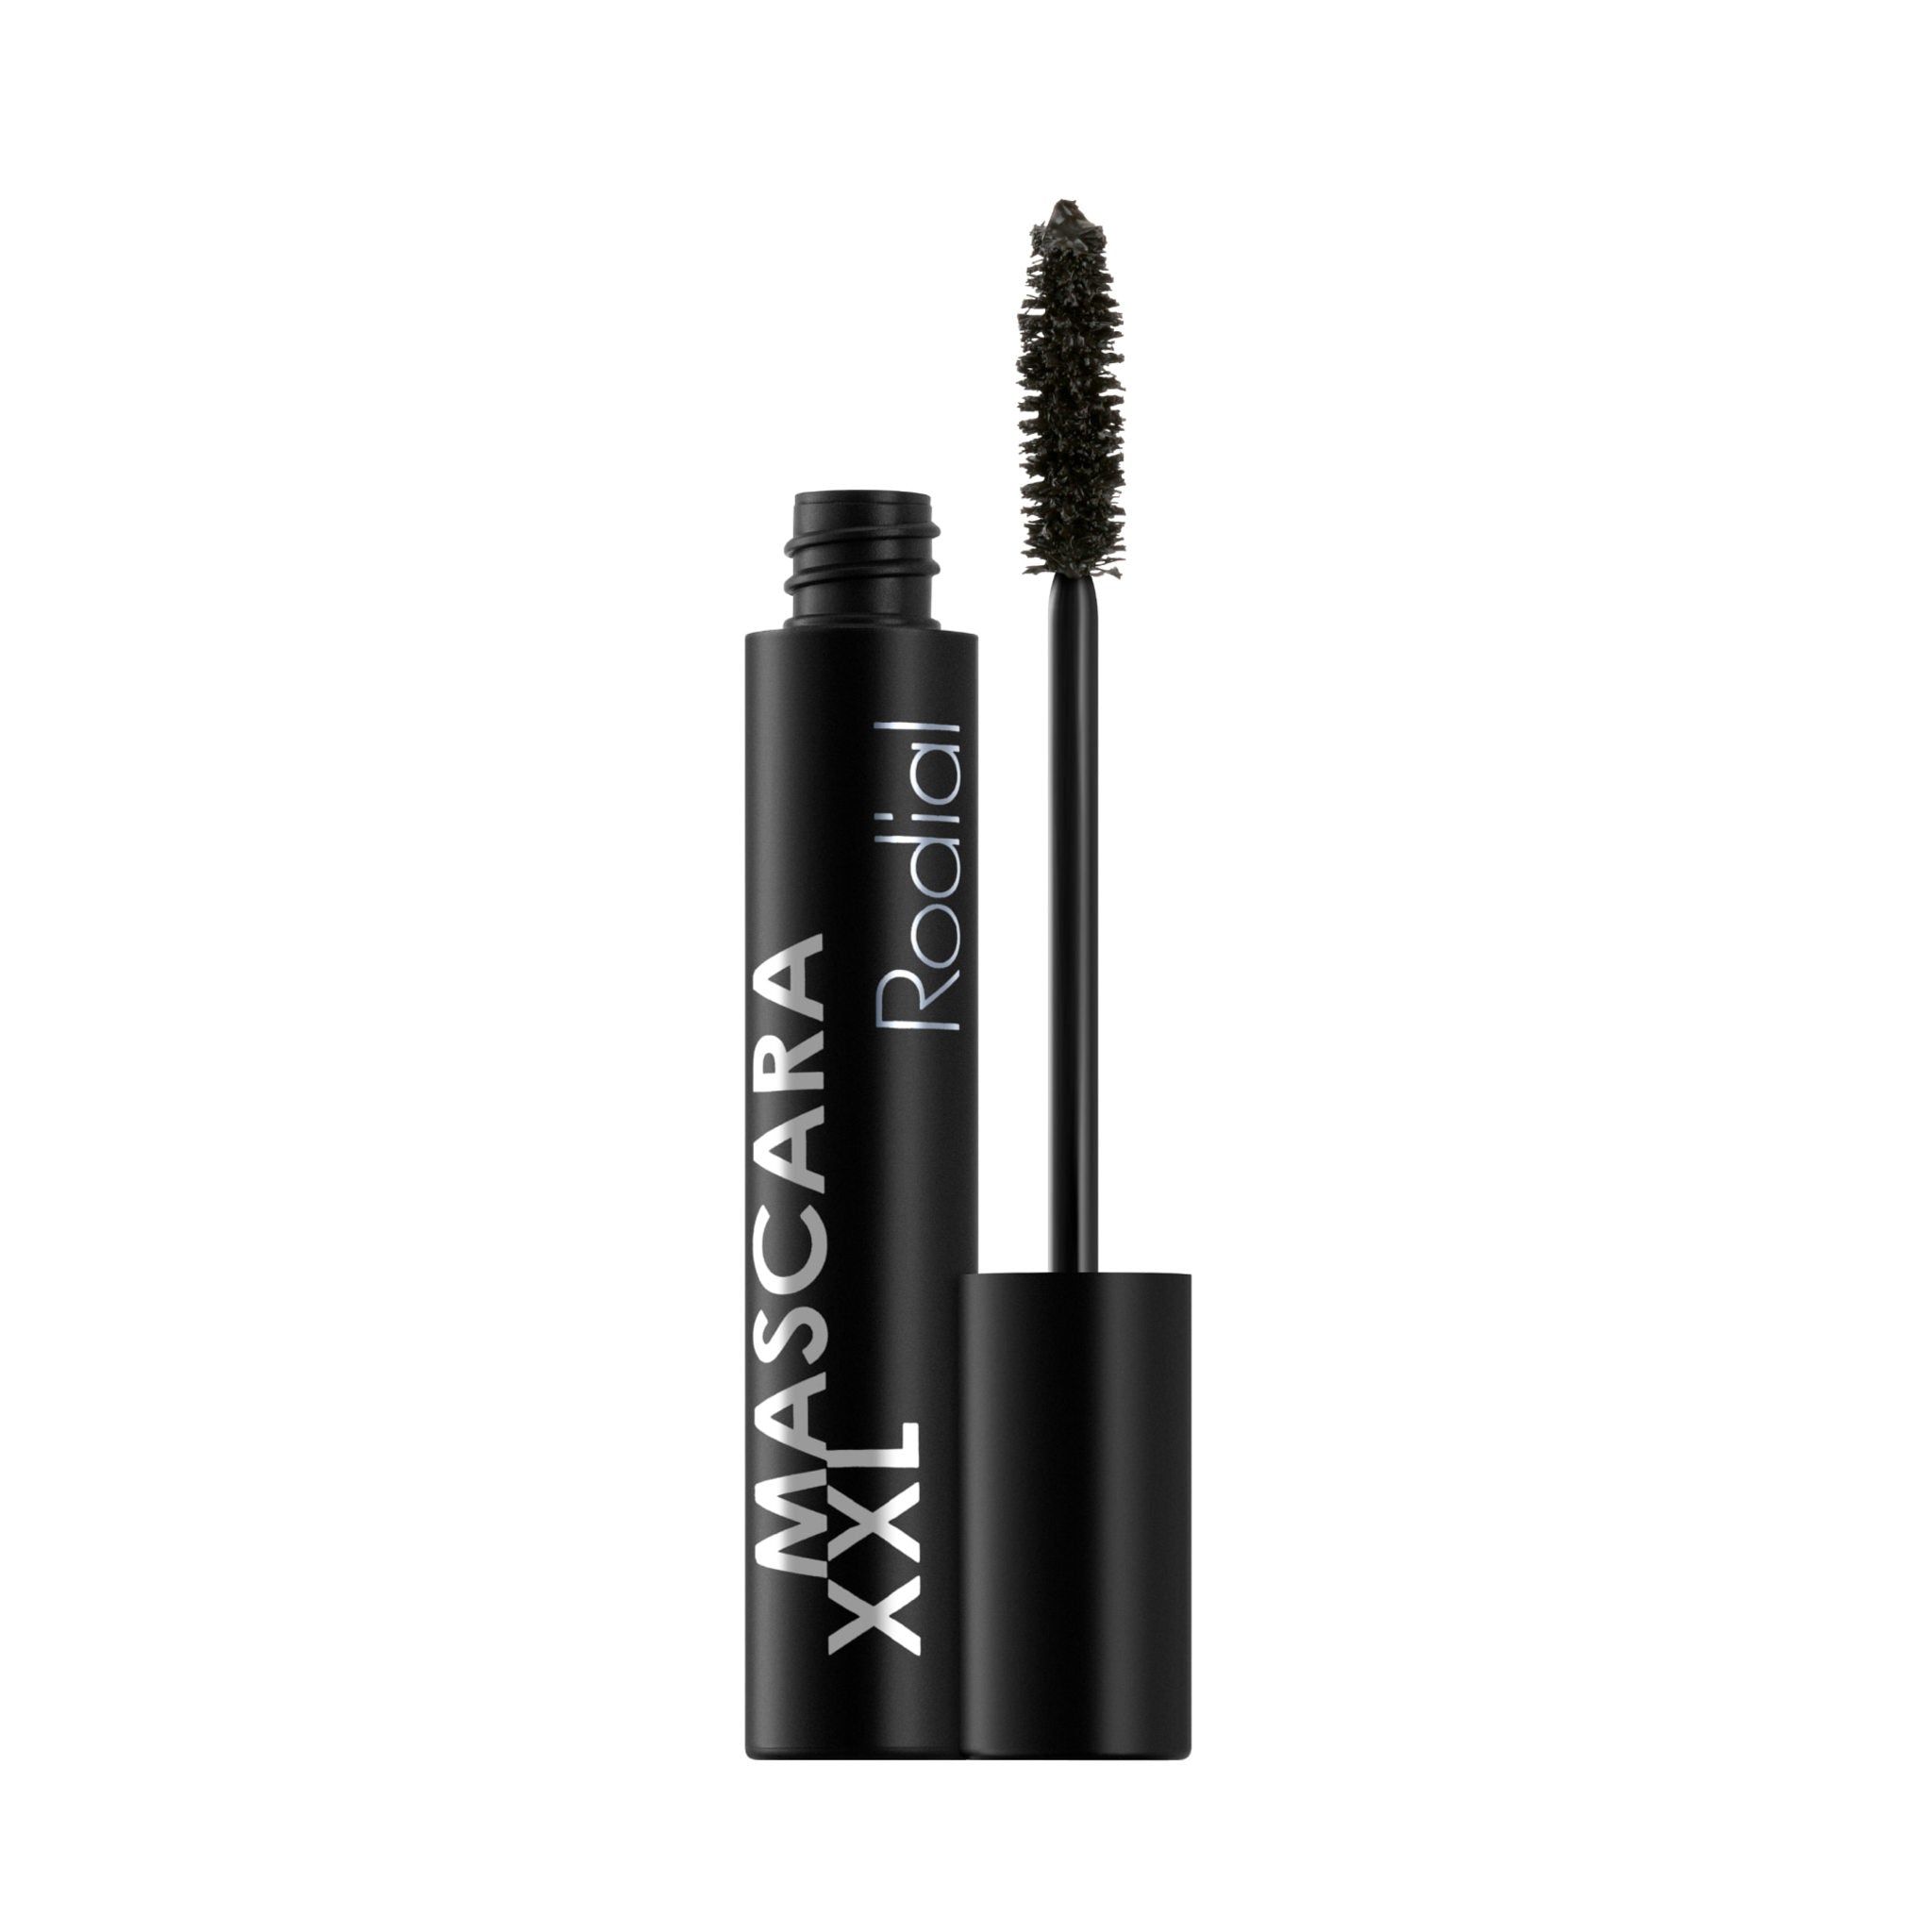 Rodial Glamolash Mascara XXL Black main image. This product is in the color black